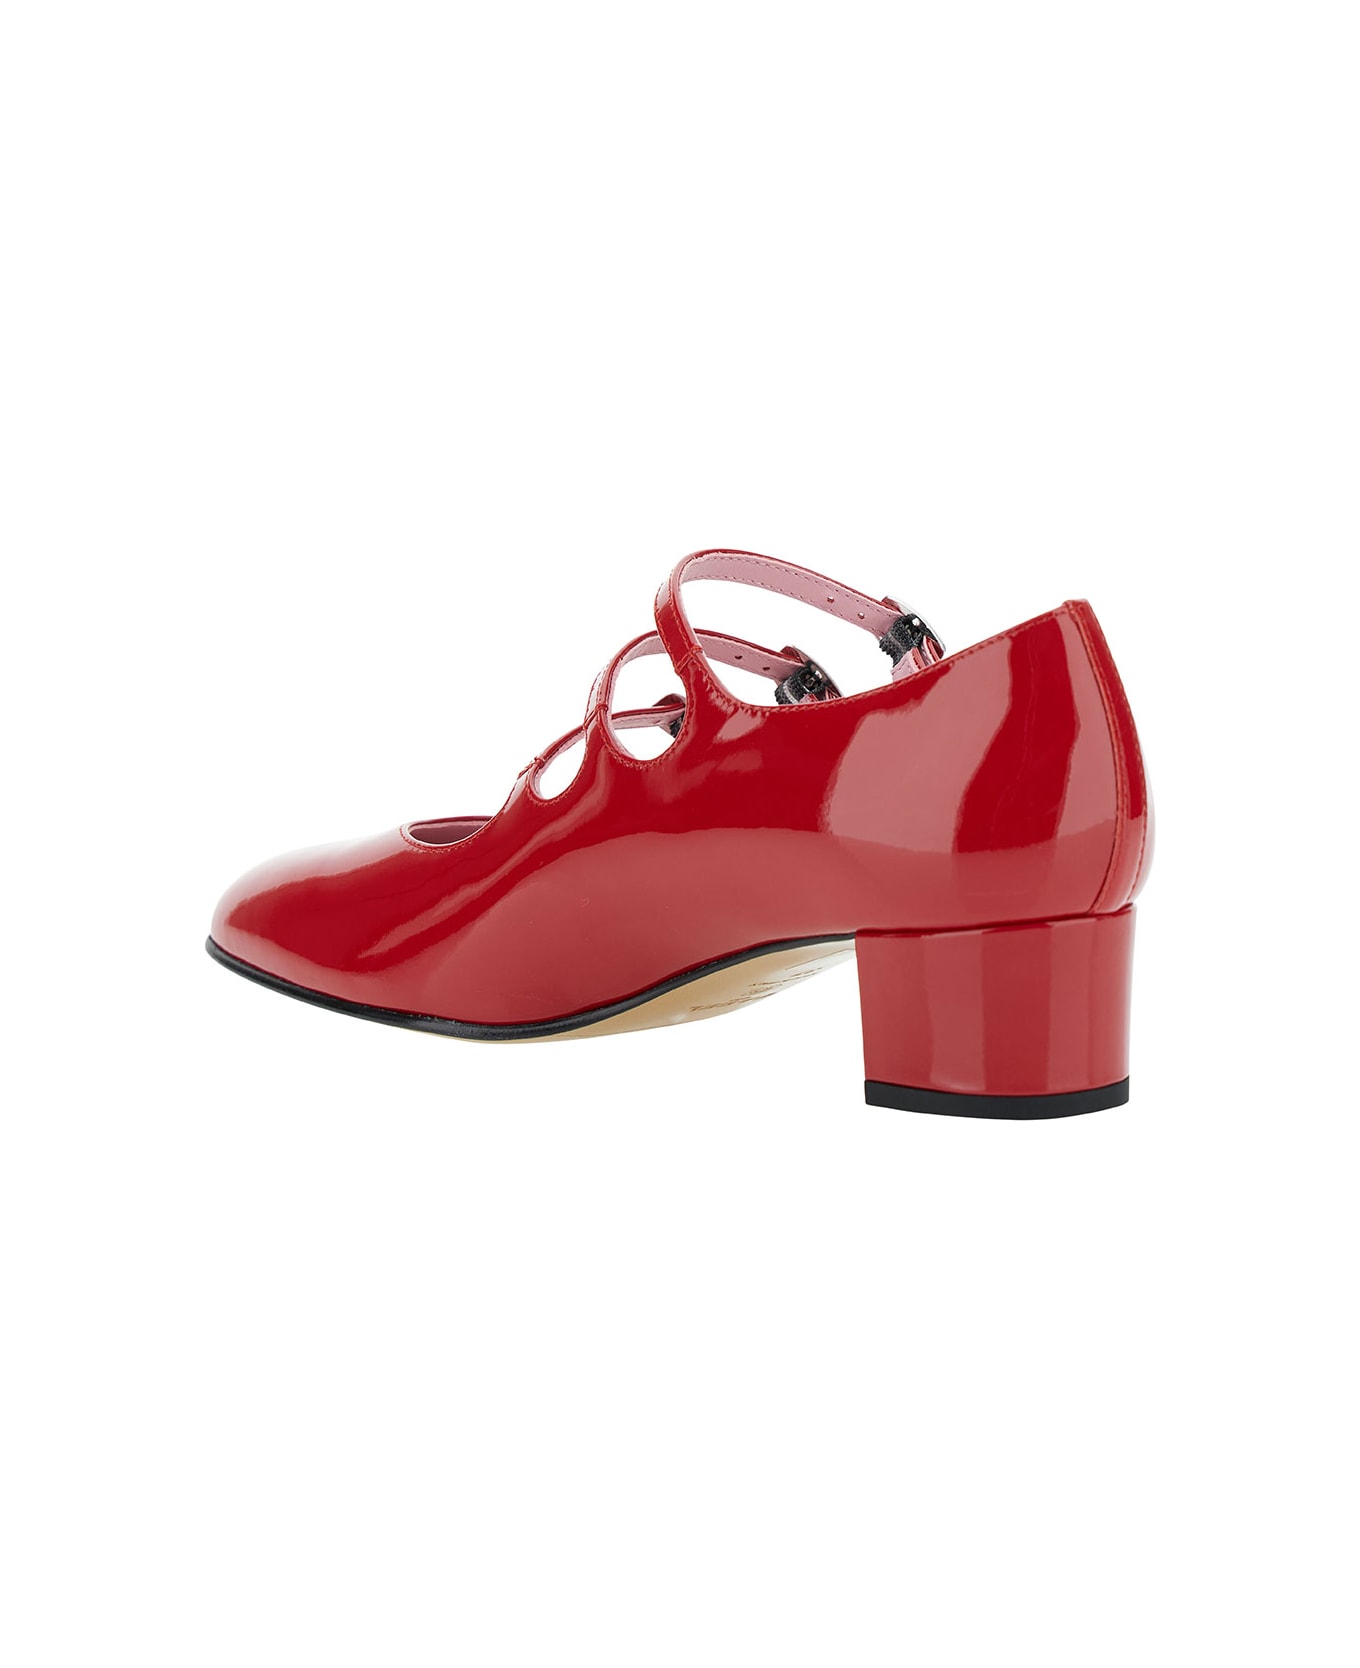 Carel 'kina' Red Mary Janes With Straps And Block Heel In Patent Leather Woman - Red ハイヒール